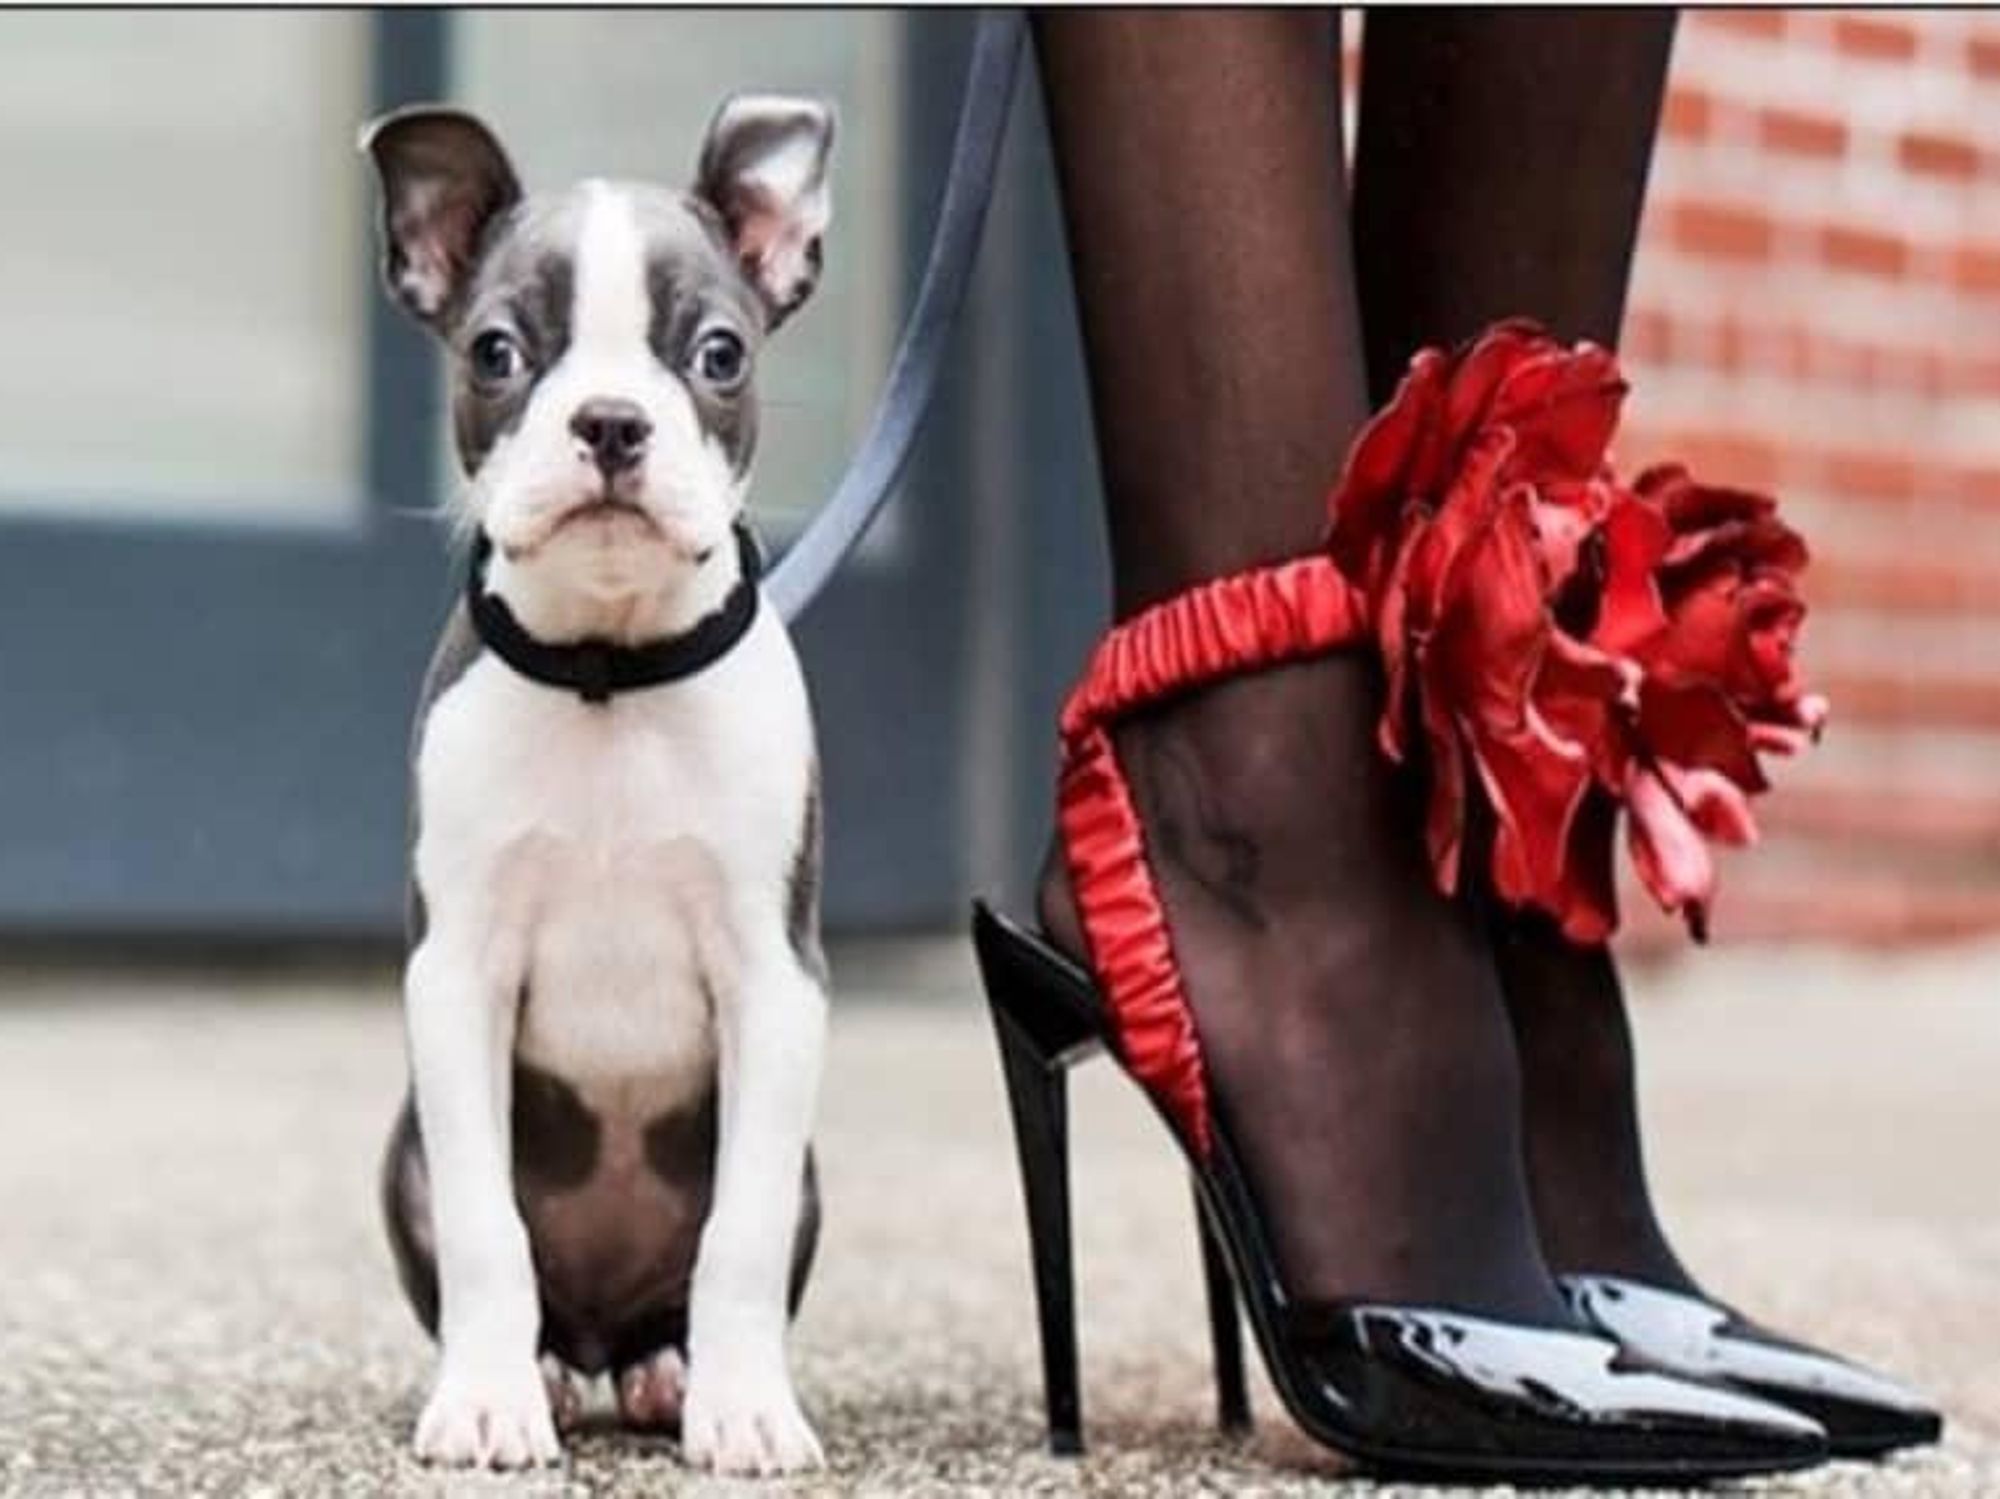 Dog and woman in heels